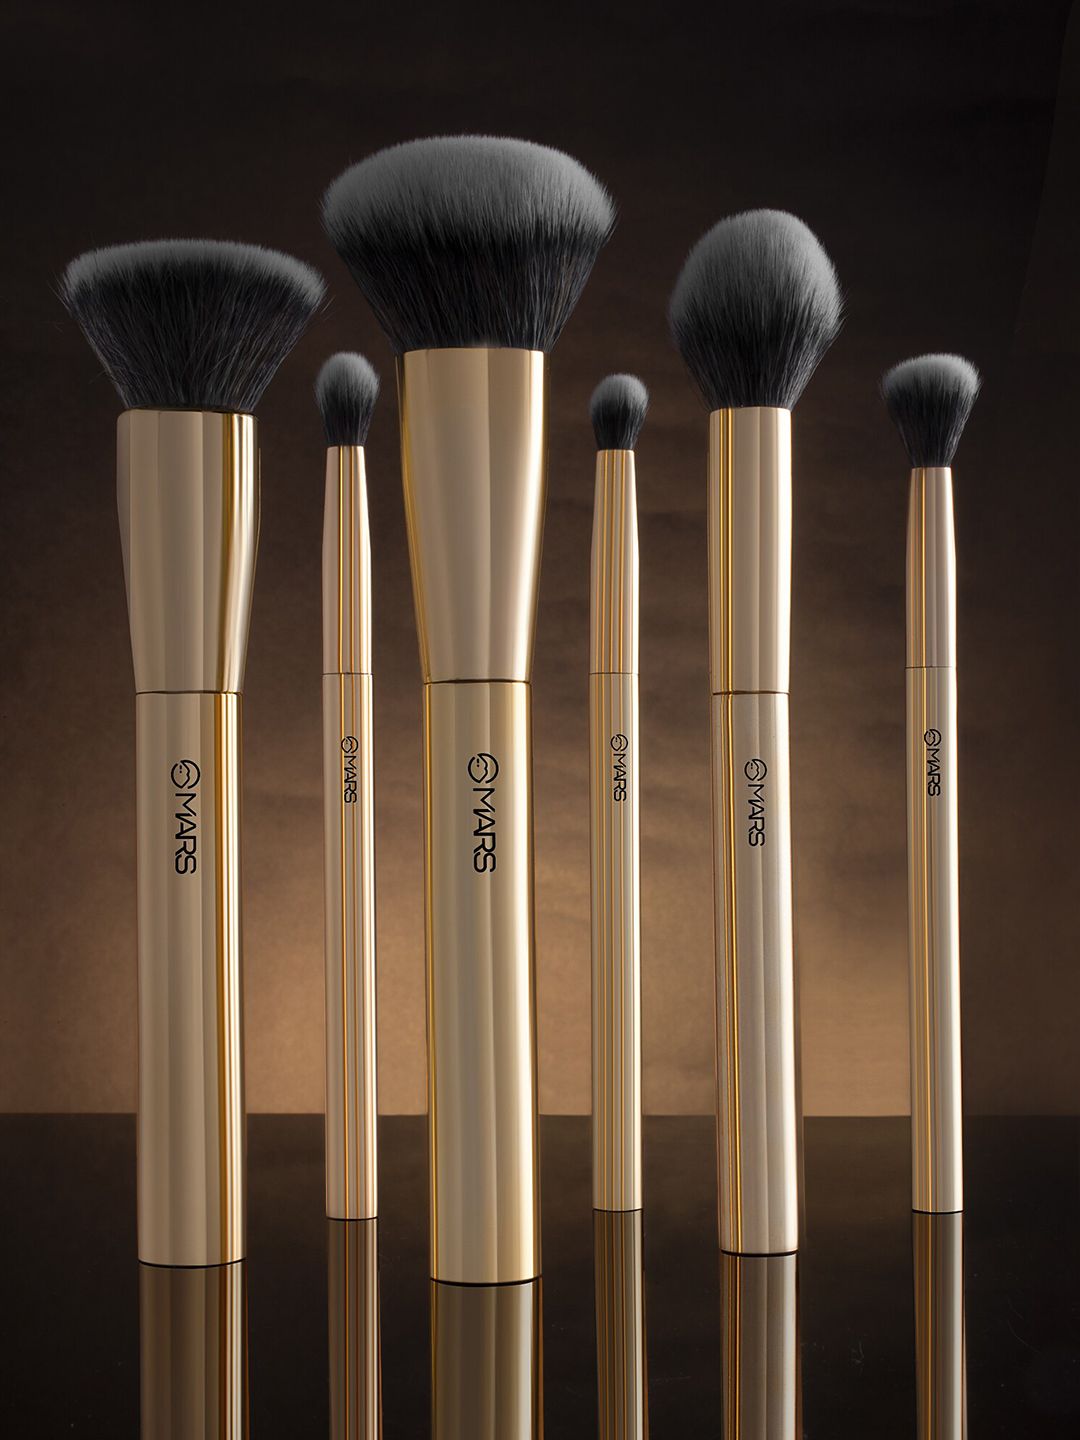 MARS Set of 6 Artist's Arsenal Makeup Brushes Price in India